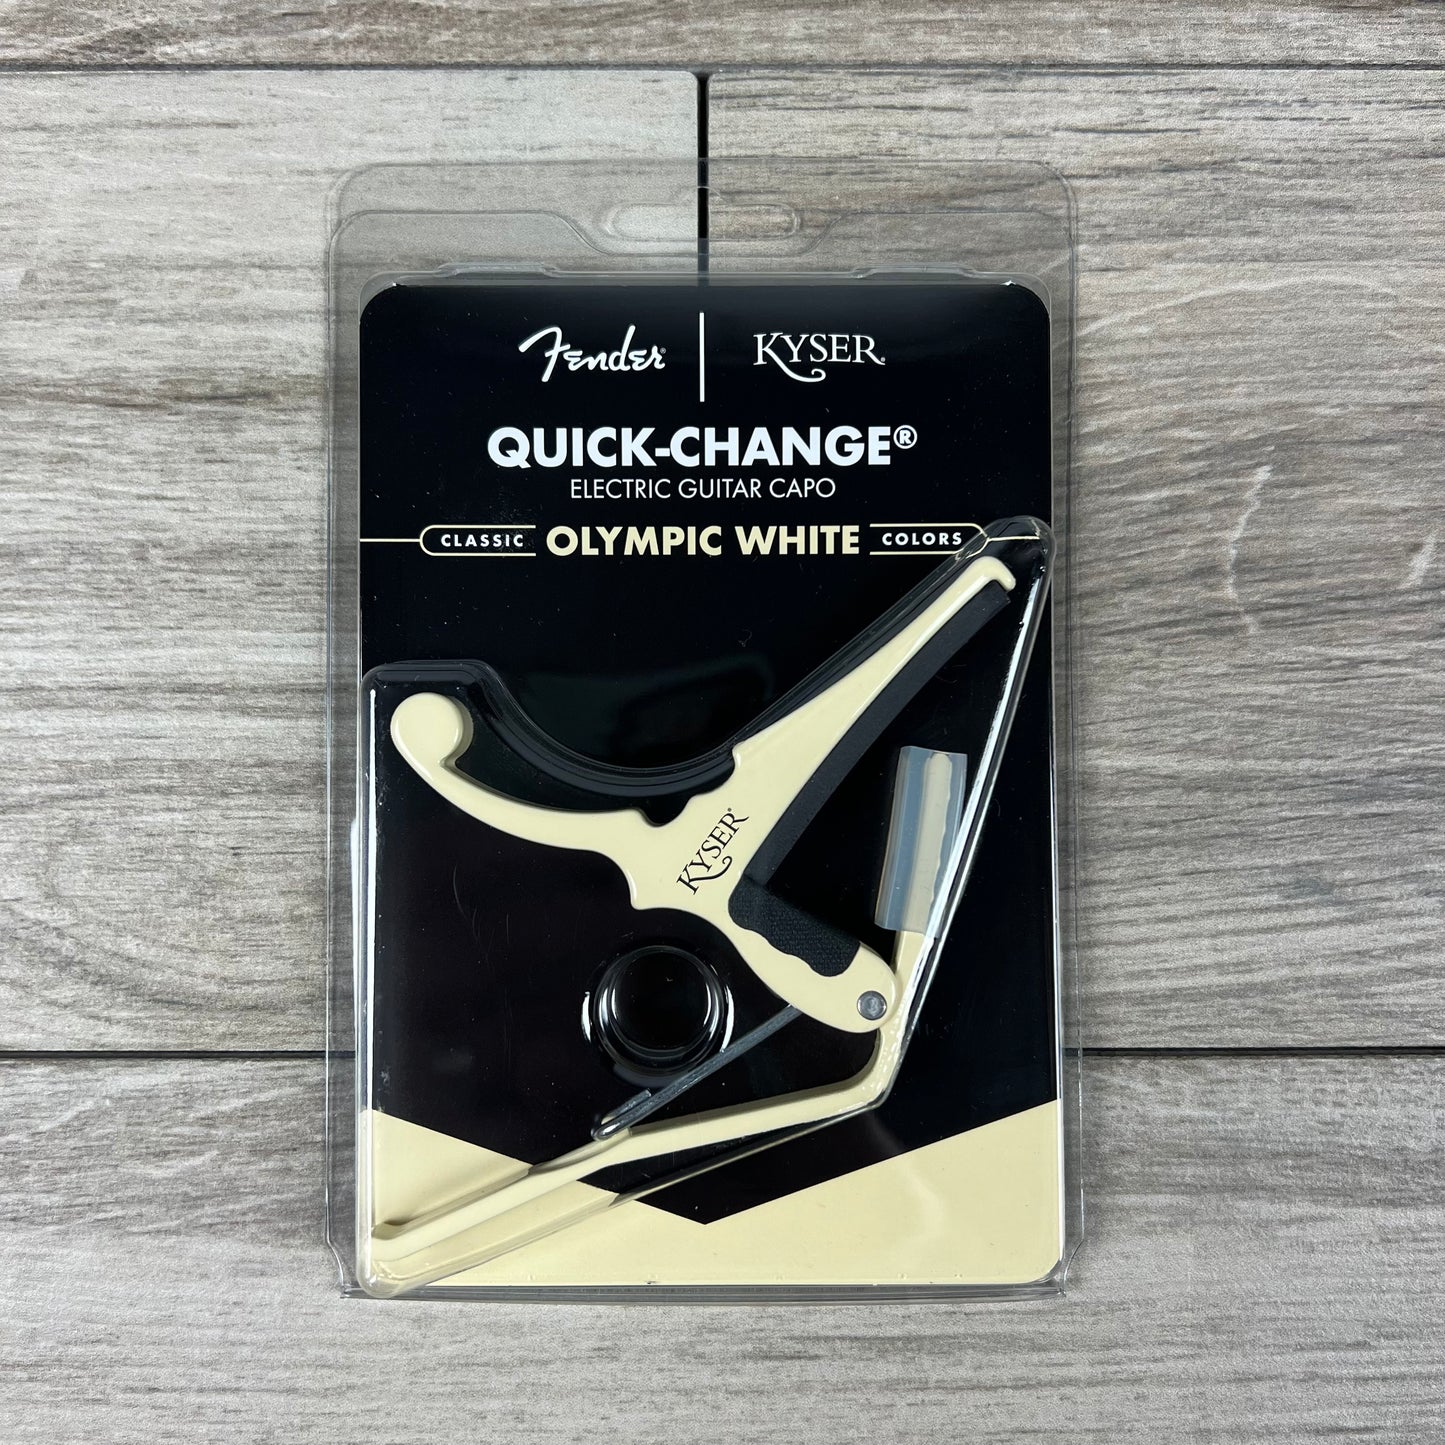 Kyser x Fender Quick-Change Electric Guitar Capo, Olympic White